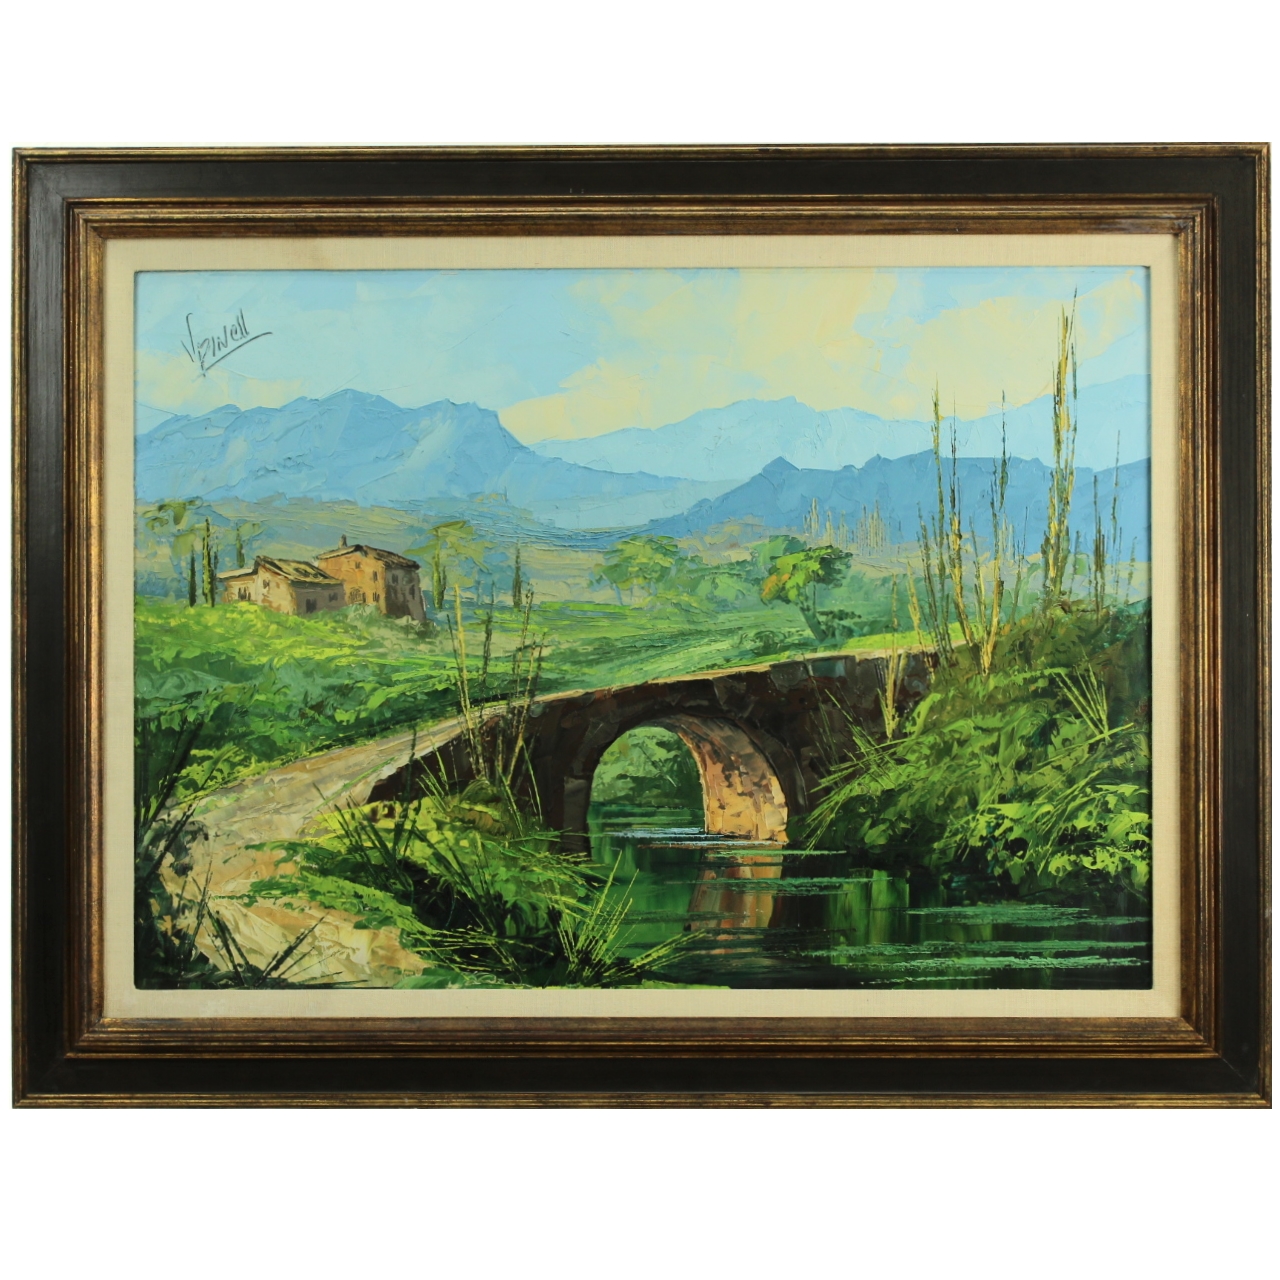 Oil on Board, by V. Pinnell, New Mexican Landscape